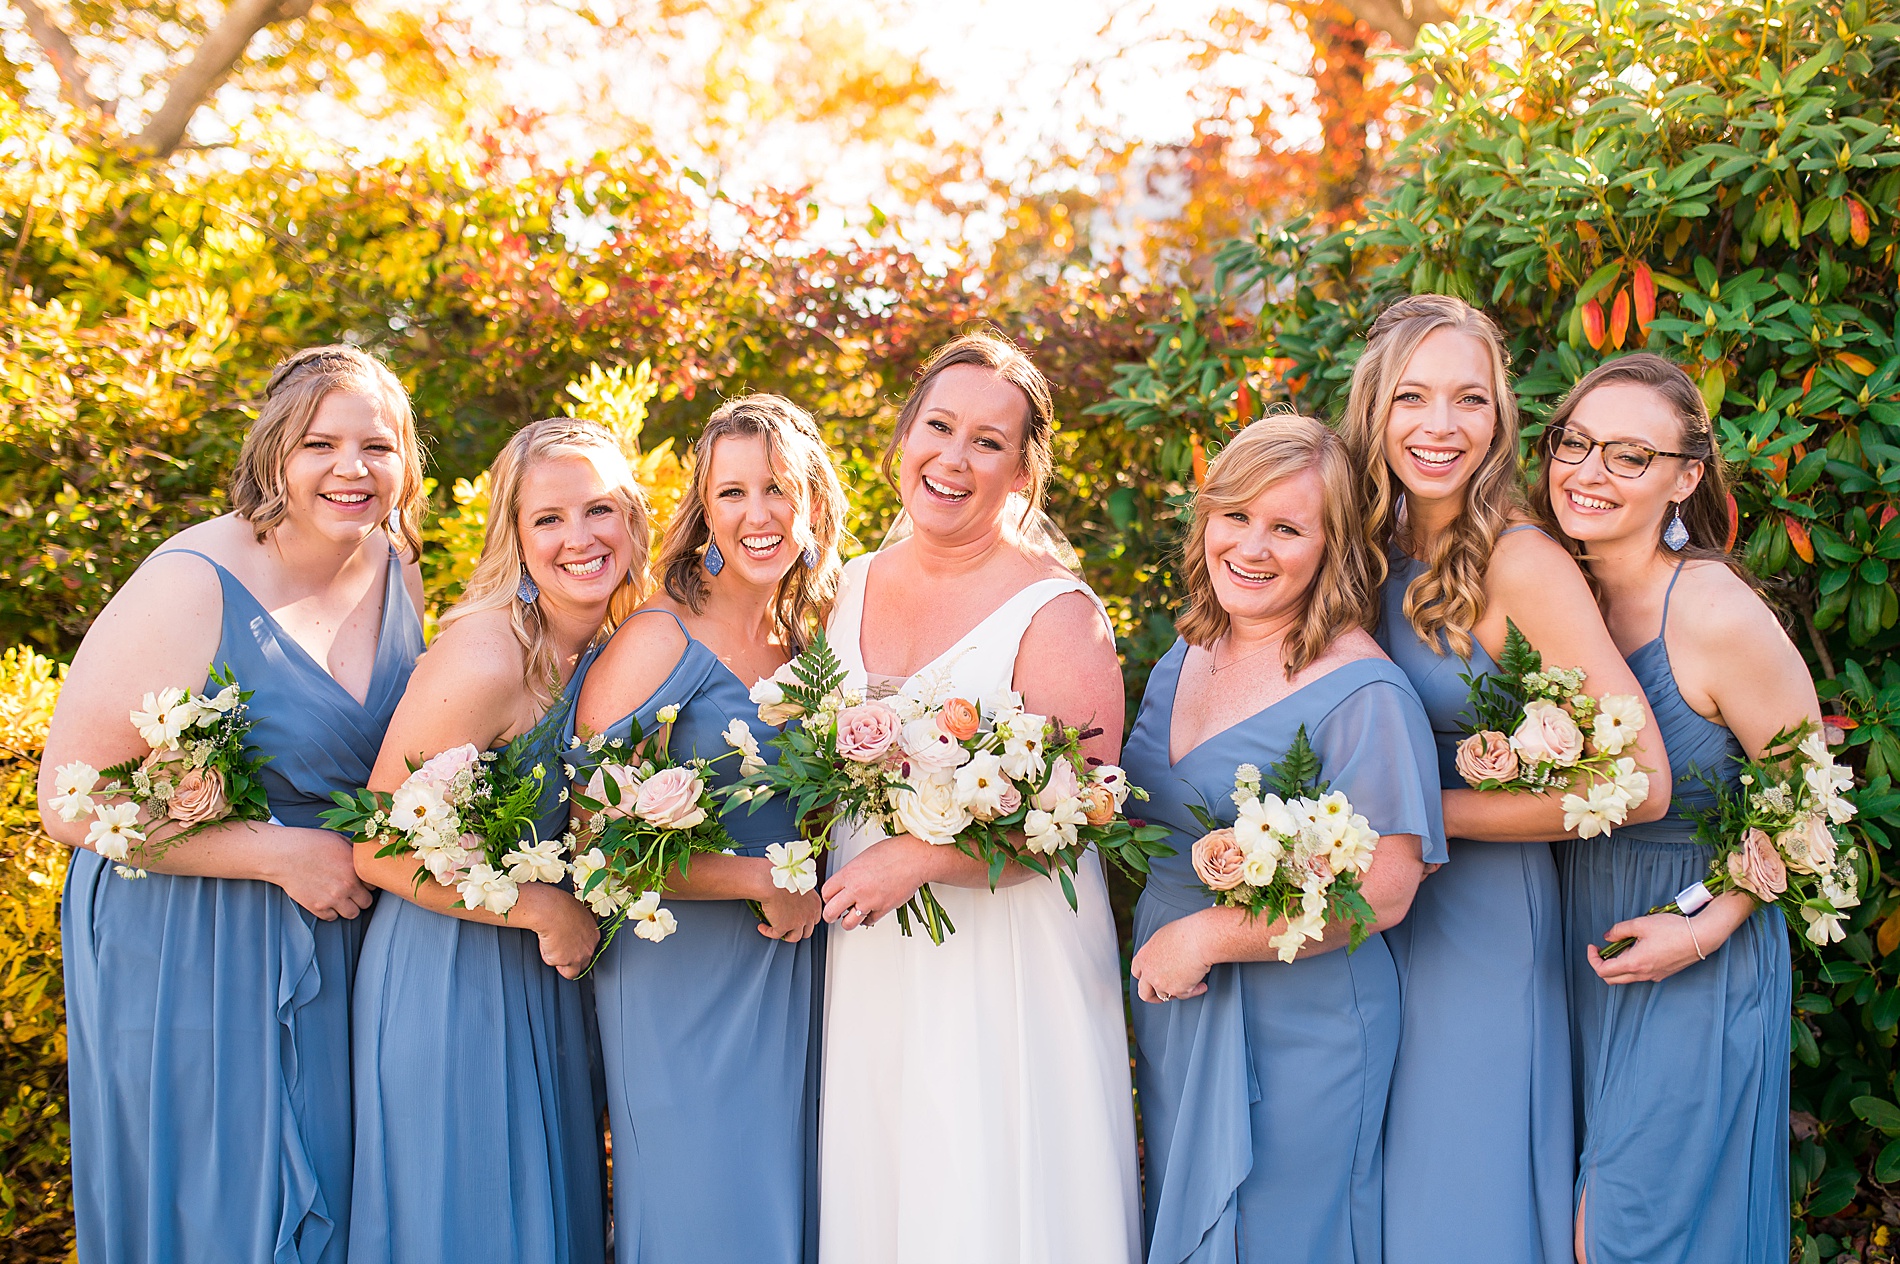 bridesmaids in steel blue dresses stand with bride holding wedding bouquets